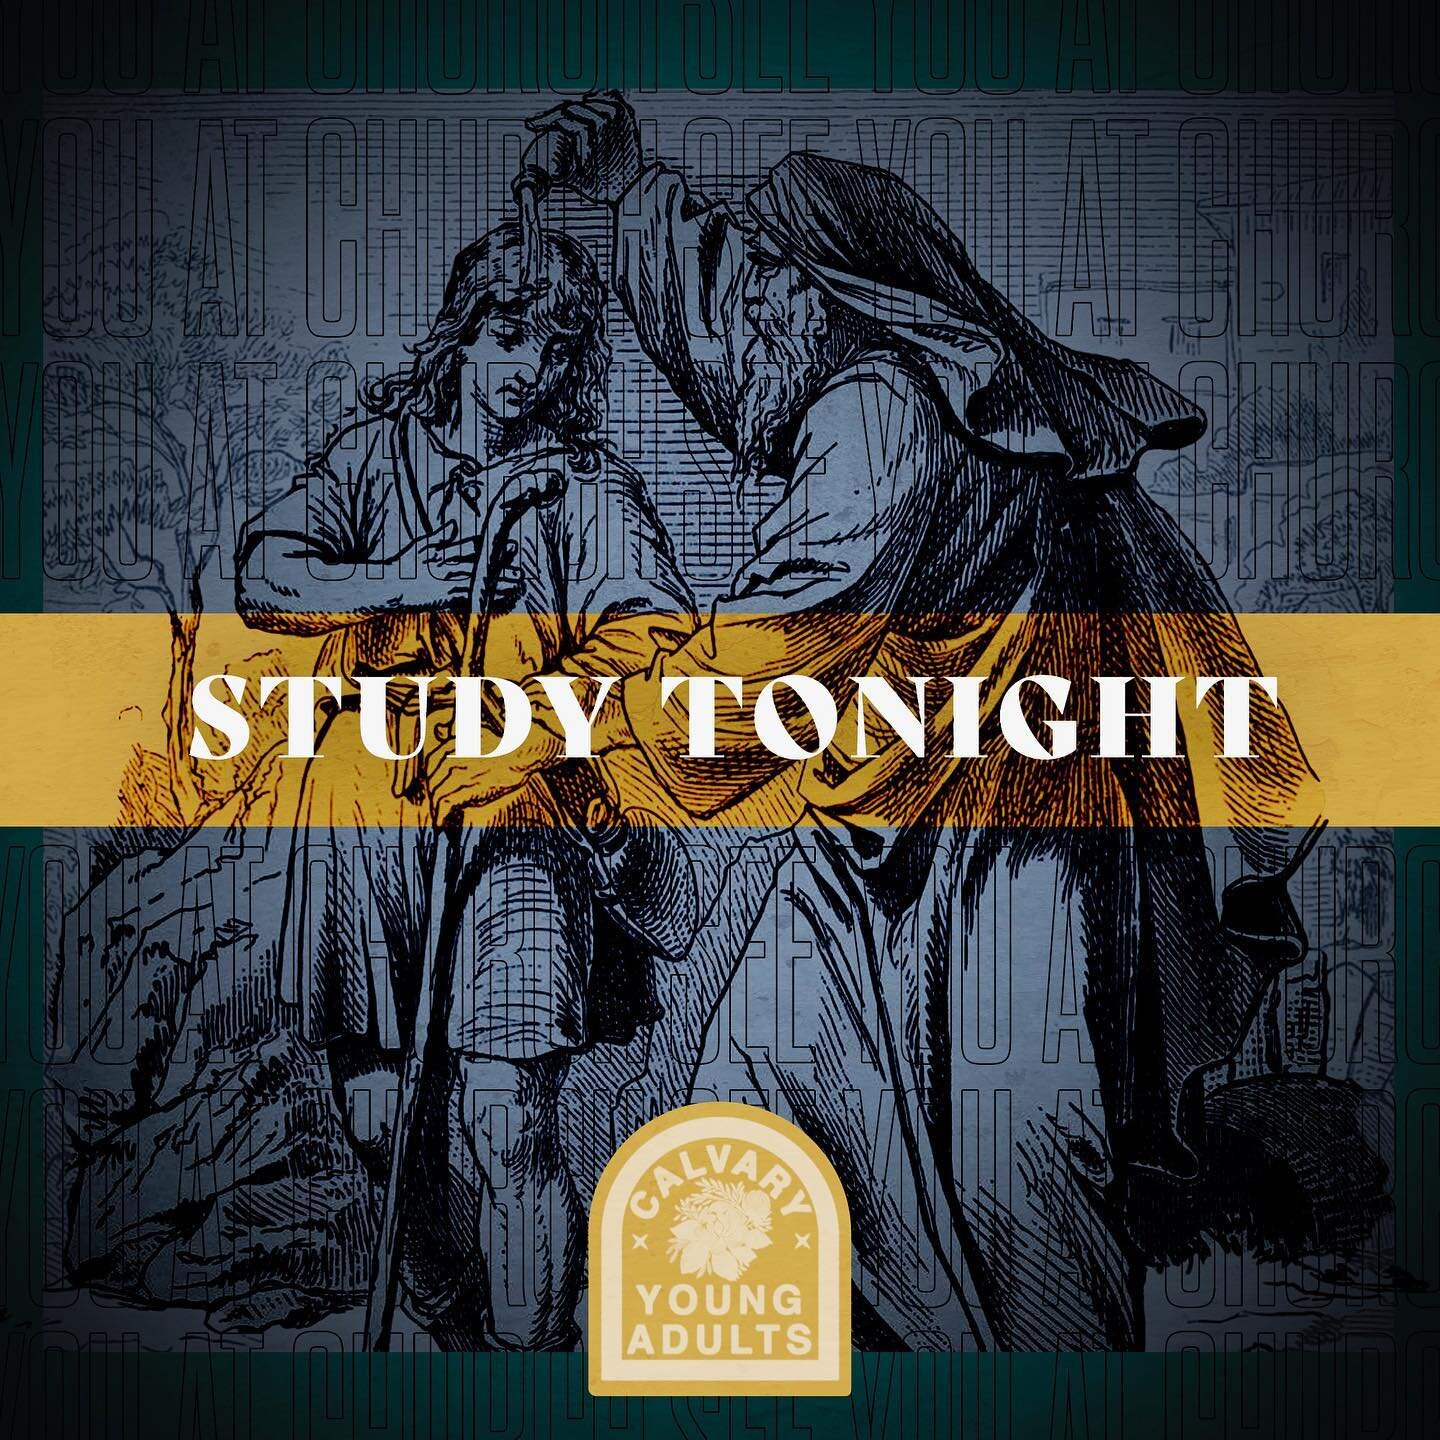 We&rsquo;ve got study tonight! We can&rsquo;t wait to worship the Lord together!

We&rsquo;ll see you here at 6:30pm.